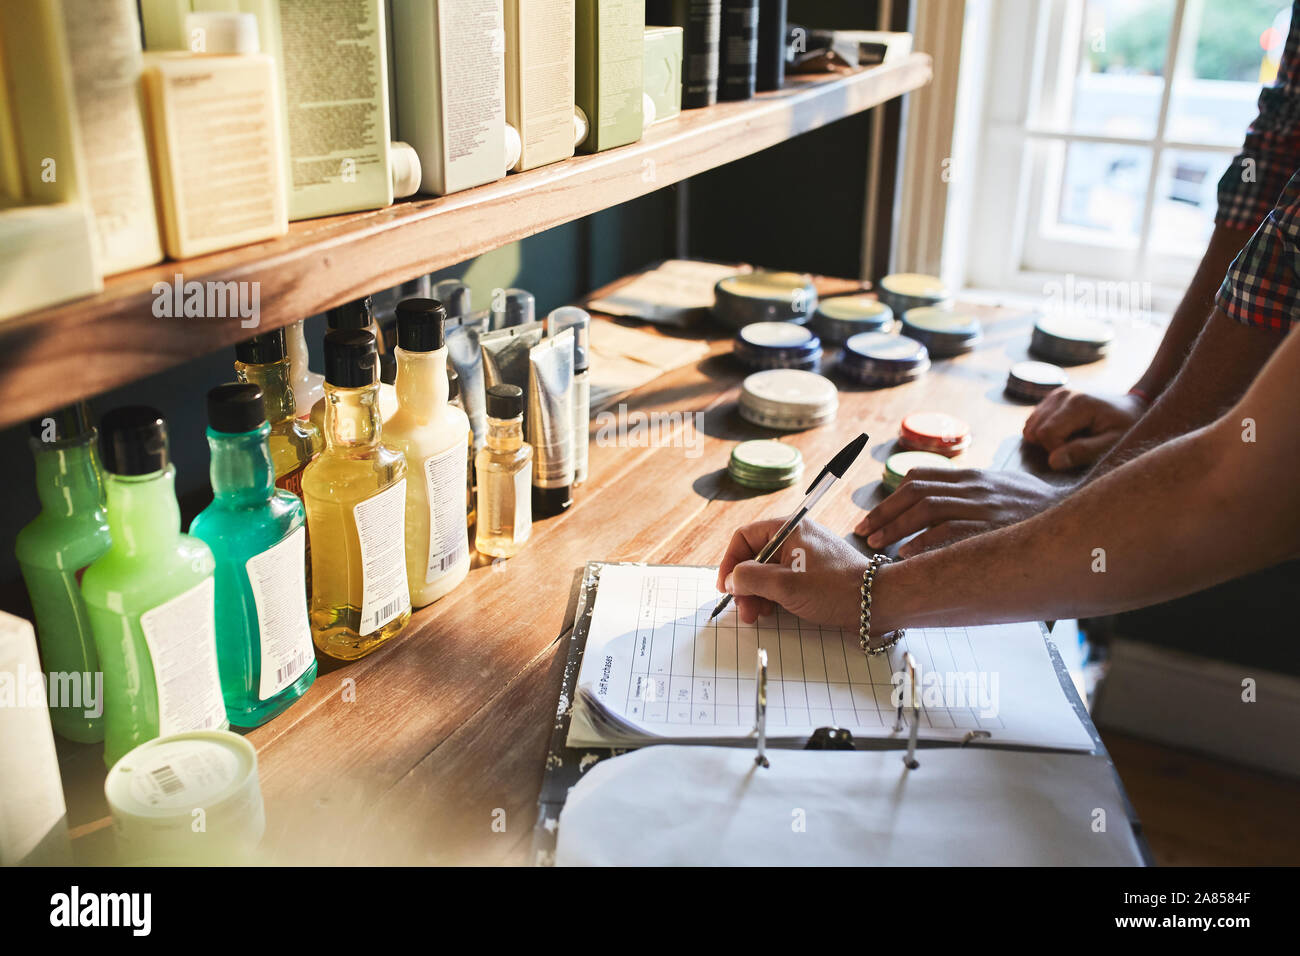 Male barbershop owner checking product inventory Stock Photo